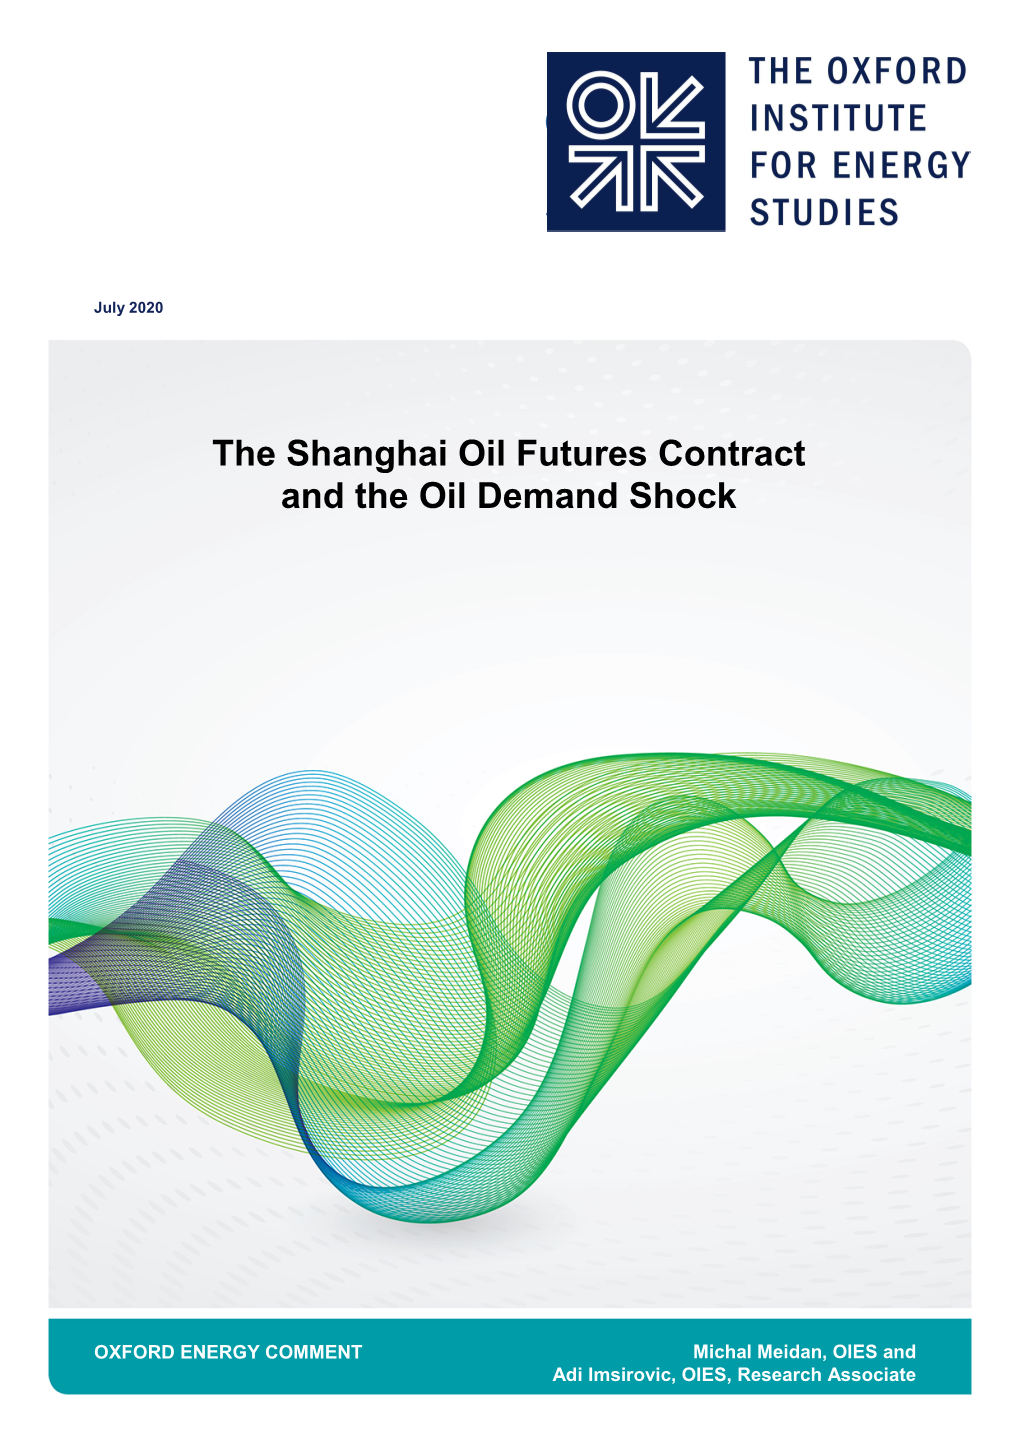 The Shanghai Oil Futures Contract and the Oil Demand Shock